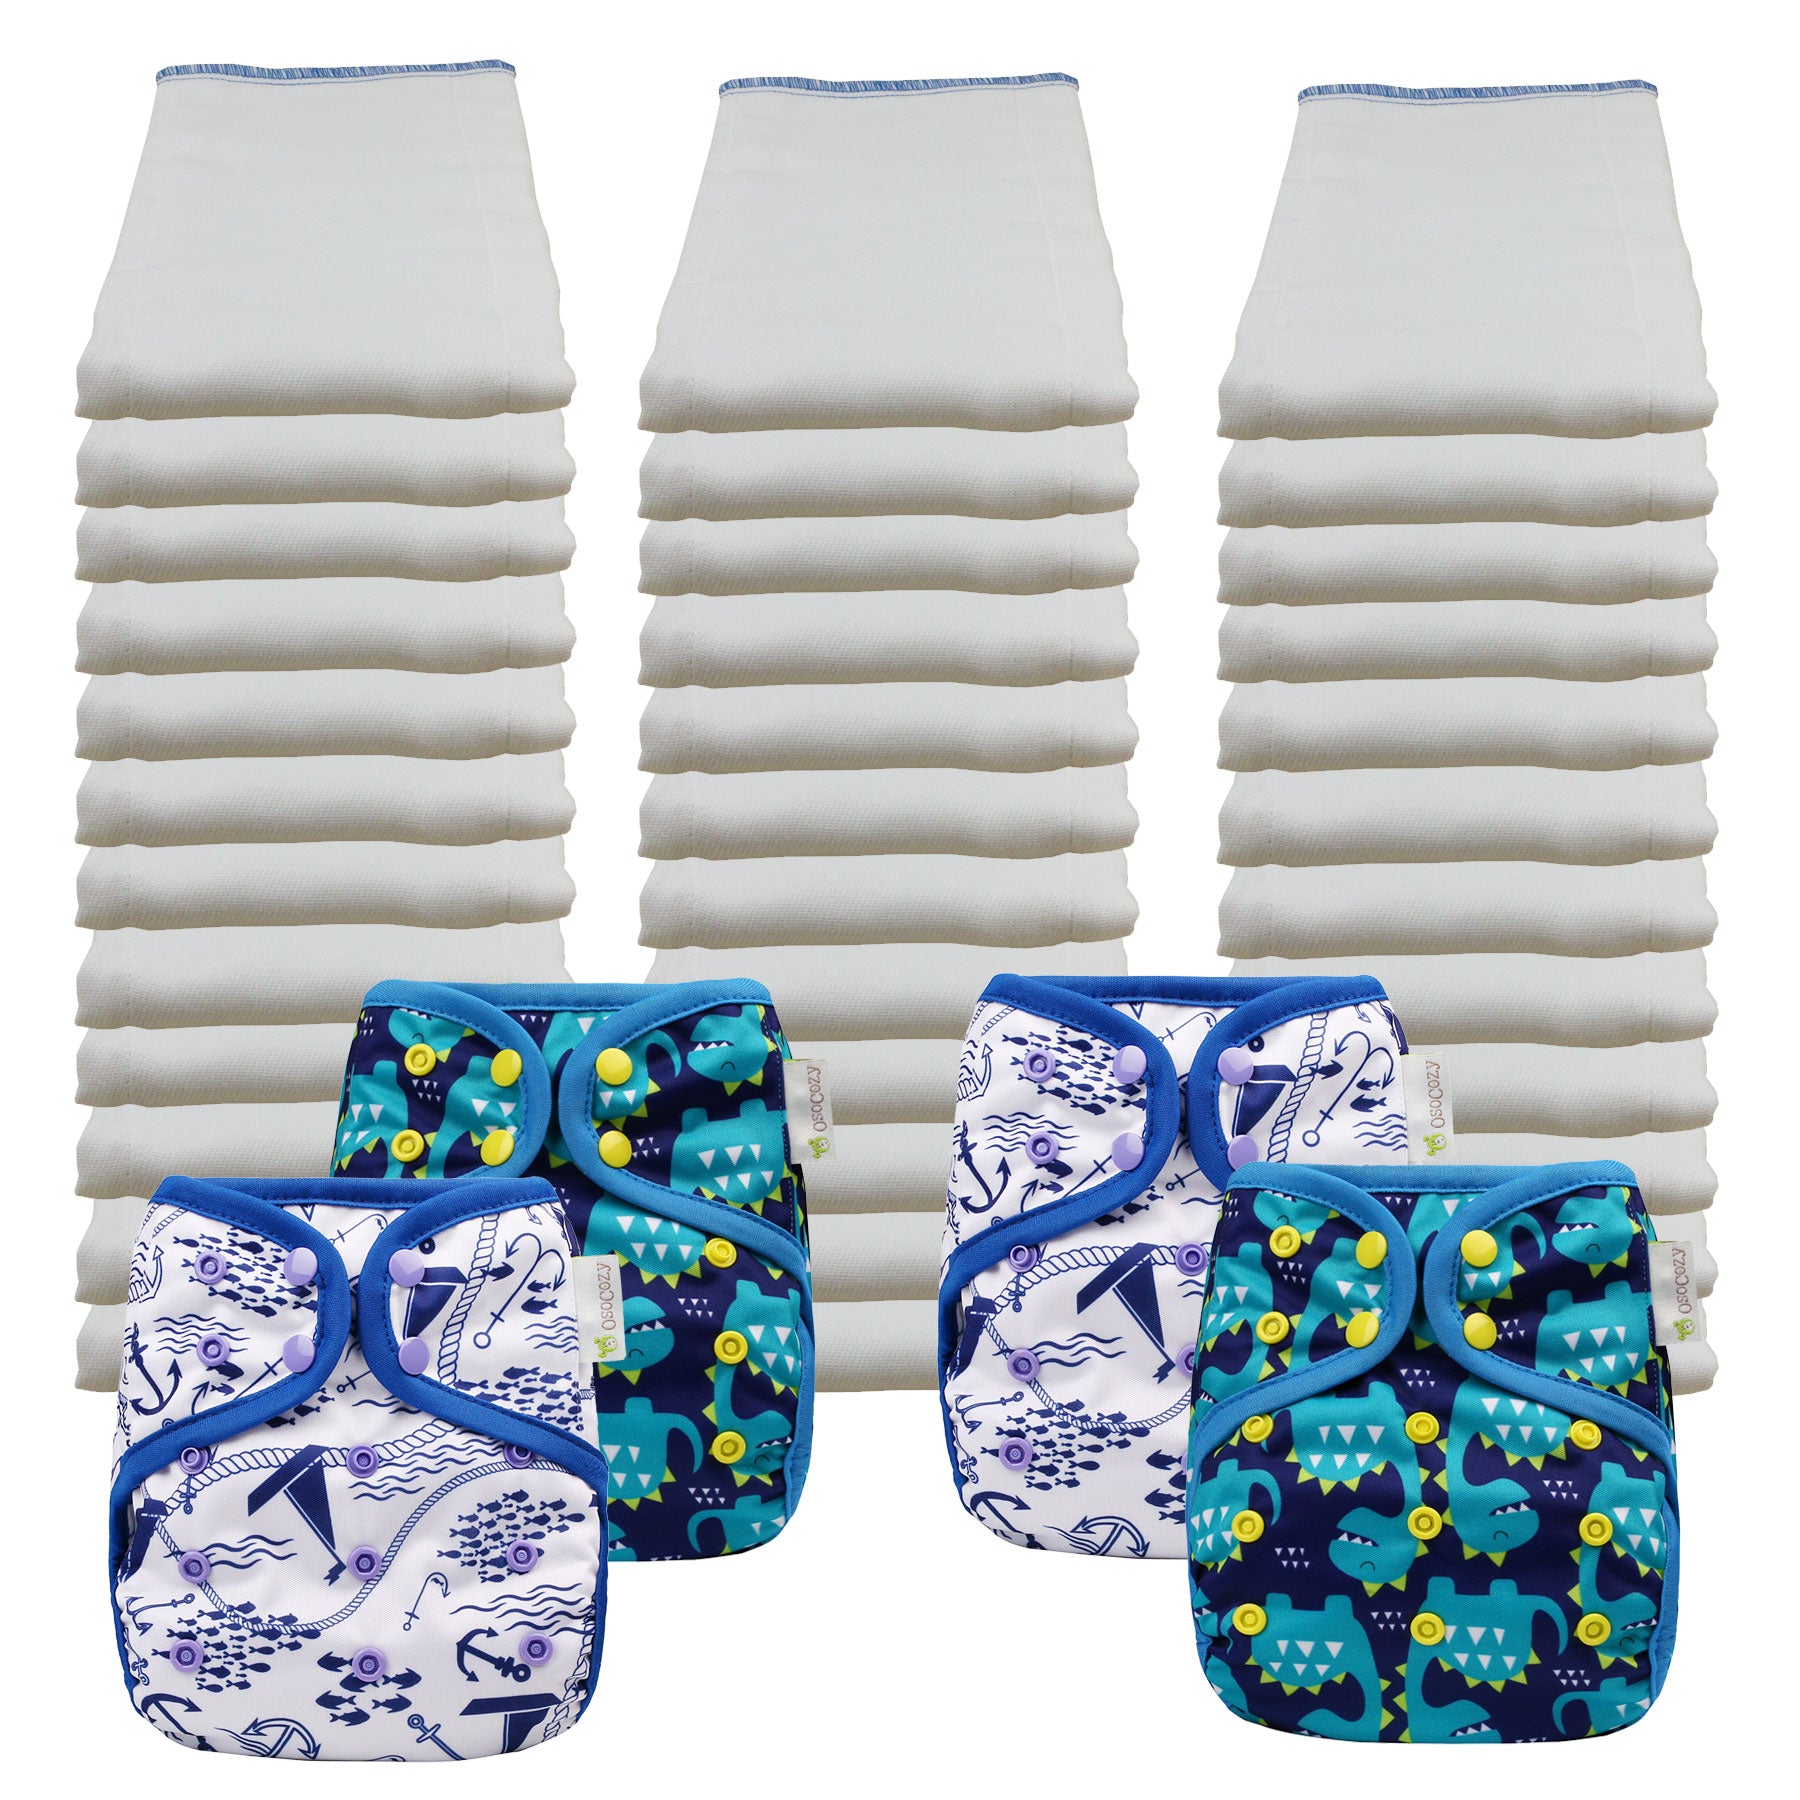 Bleached Economy Prefold Diaper Packages with OsoCozy One Sized Covers